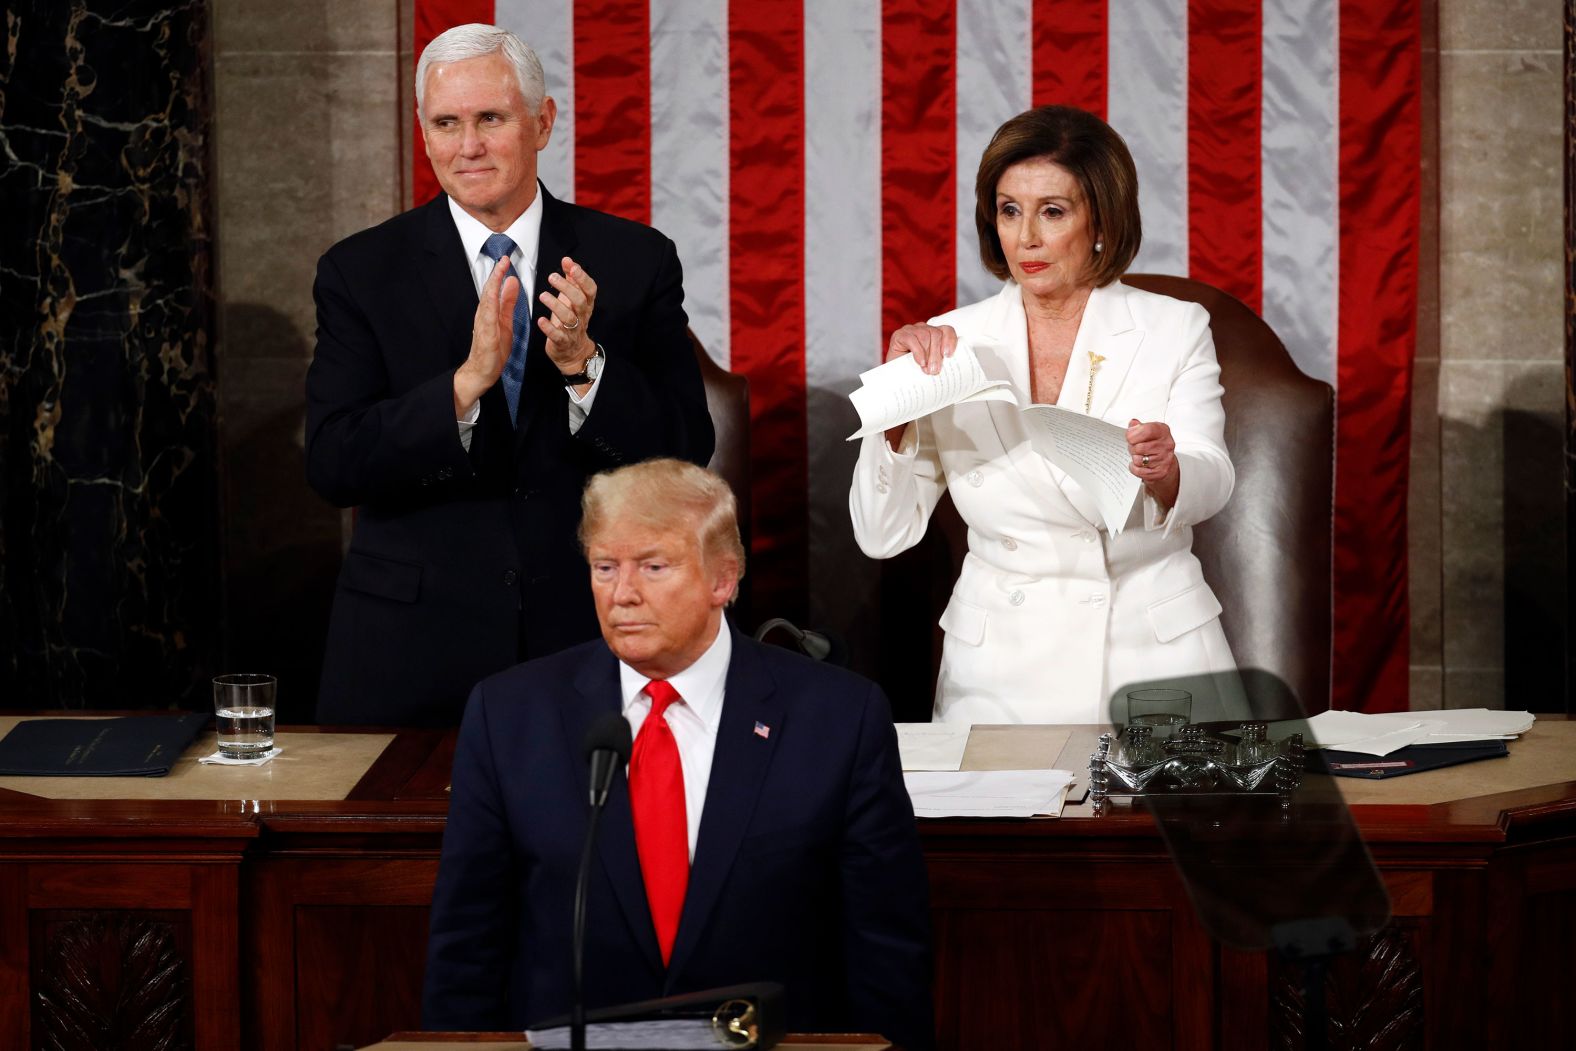 Pelosi rips up her copy of President Trump's <a href="index.php?page=&url=https%3A%2F%2Fwww.cnn.com%2F2020%2F02%2F04%2Fpolitics%2Fstate-of-the-union-2020-donald-trump%2Findex.html" target="_blank">State of the Union speech</a> after he finished in 2020. During the speech, you could feel the tension in the room between the President and the Democrats who impeached him in December 2019. Pelosi, sitting behind Trump, stretched out her hand to shake his before the speech. He didn't take it.